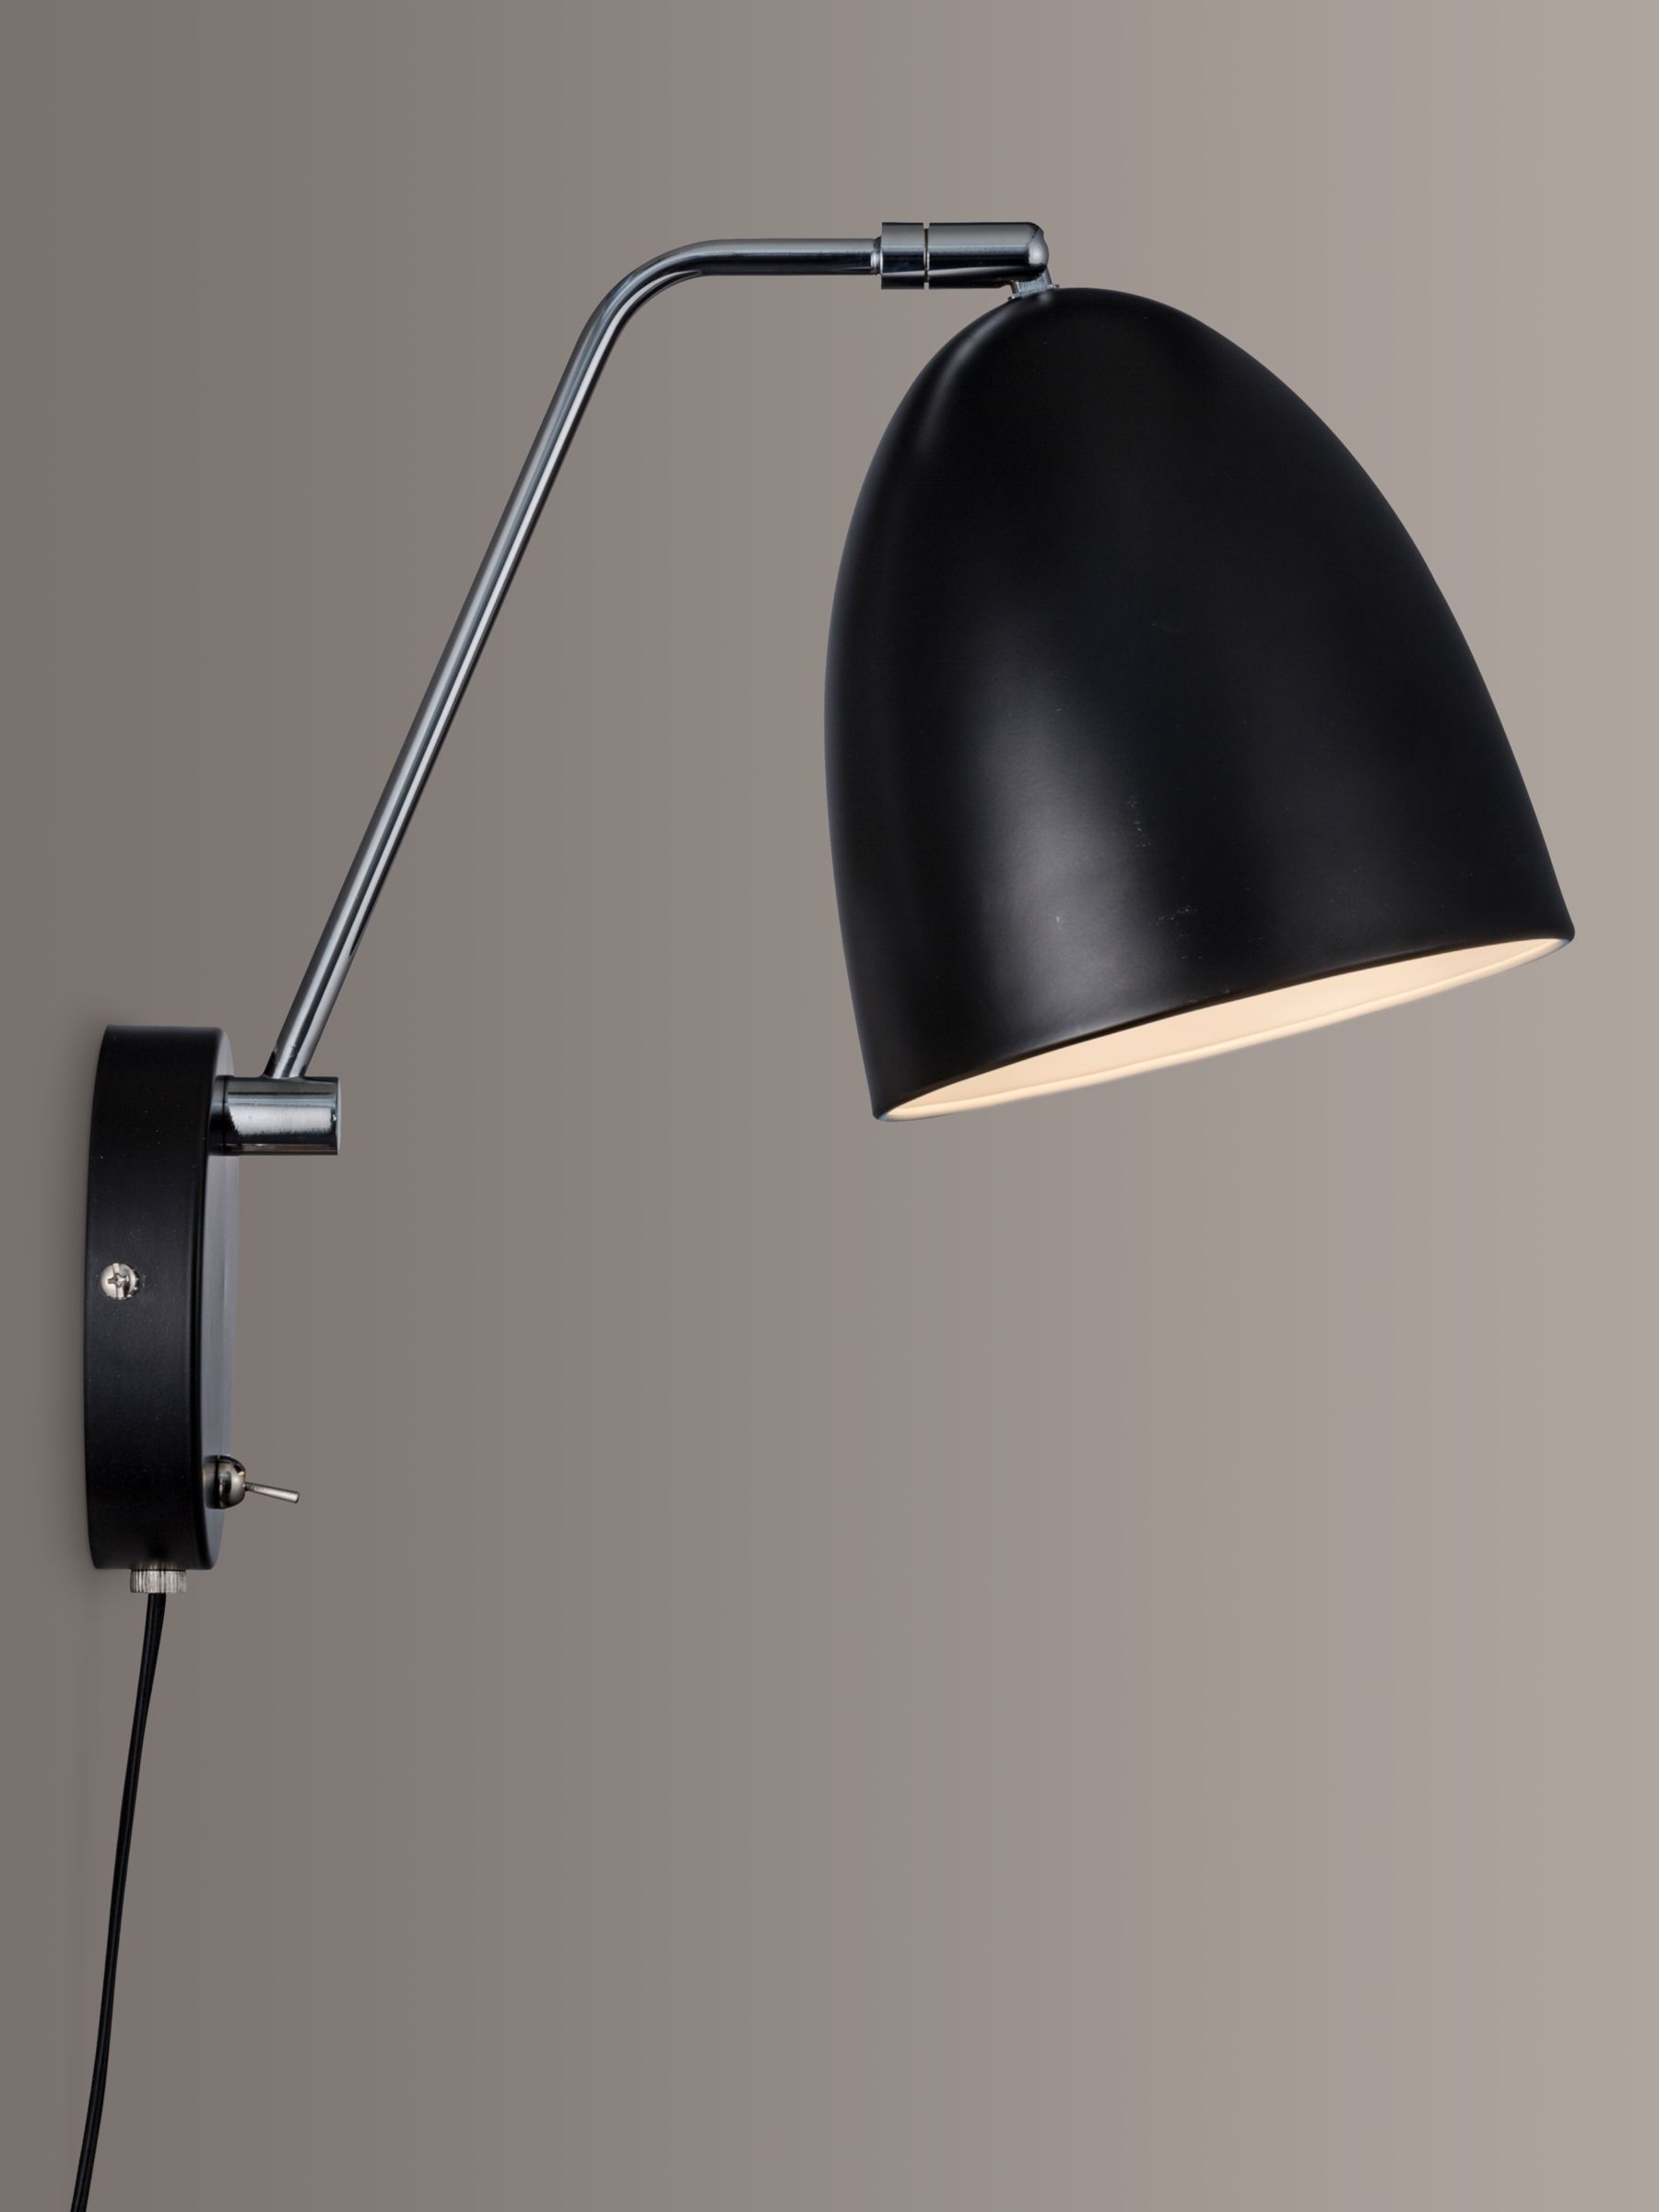 Photo of Nordlux alexander plug-in wall light